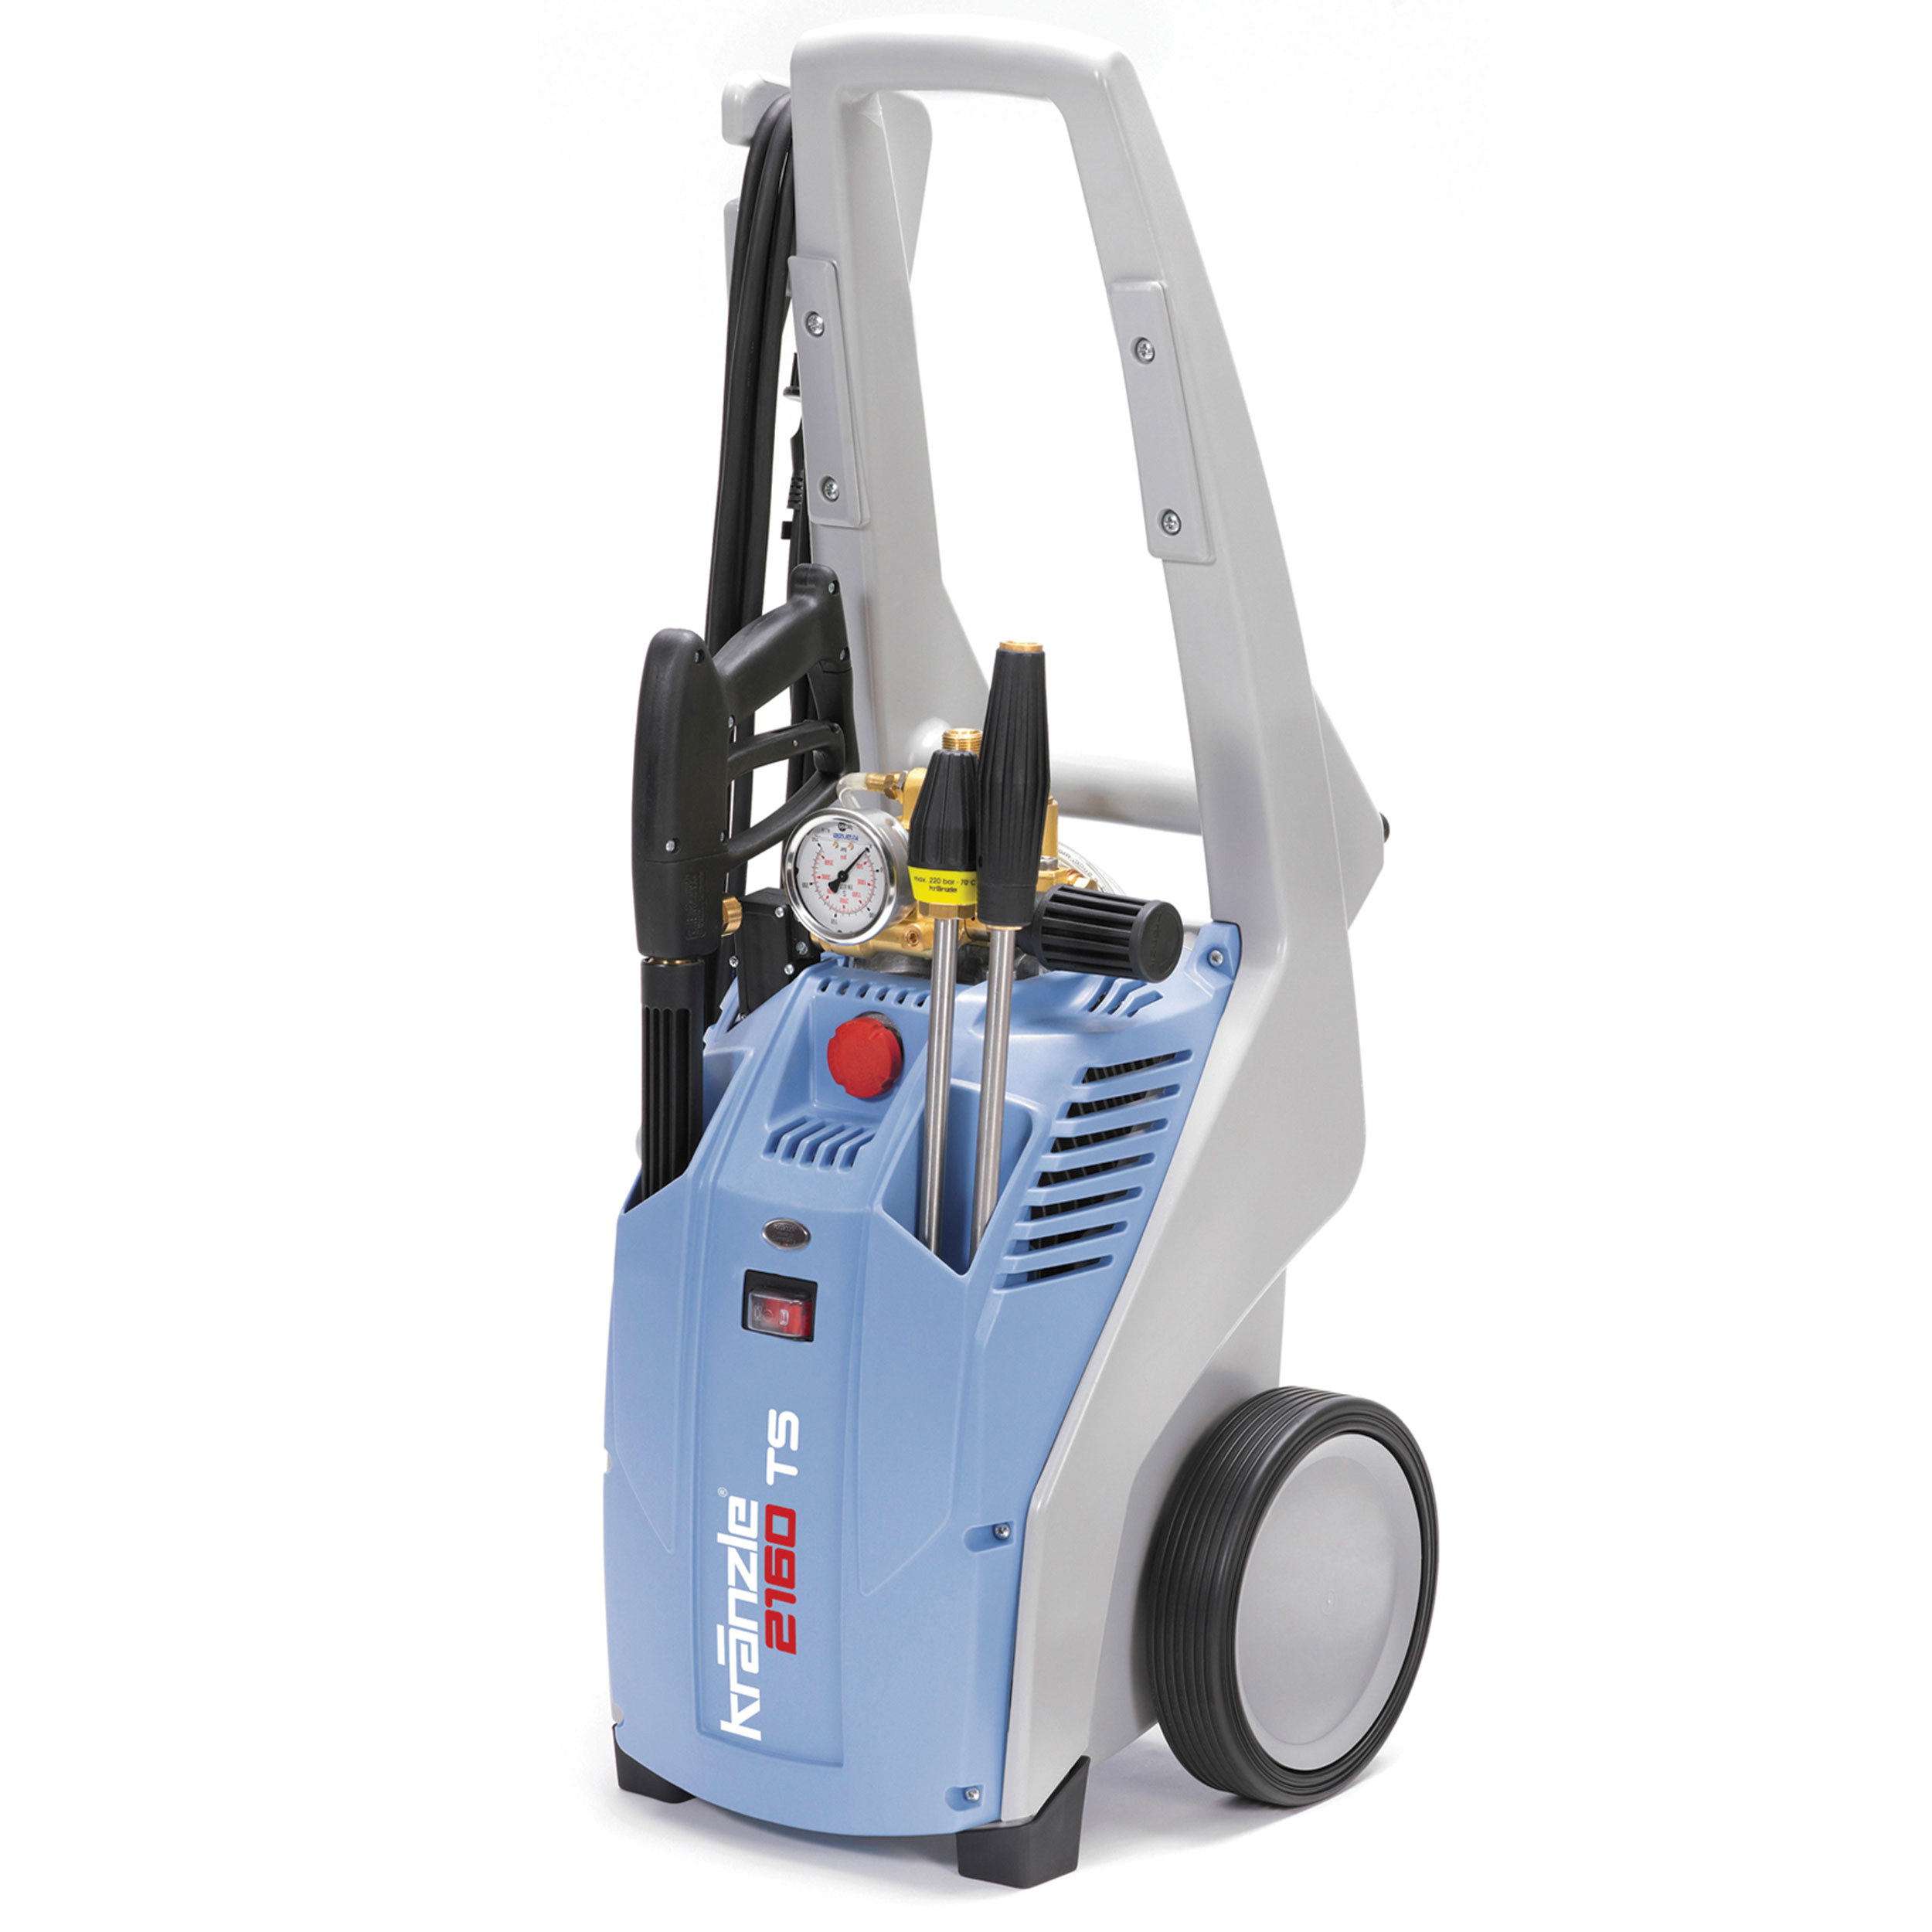 K2017t Pressure Washer, Cold Water, 110v, 15a, Gfi